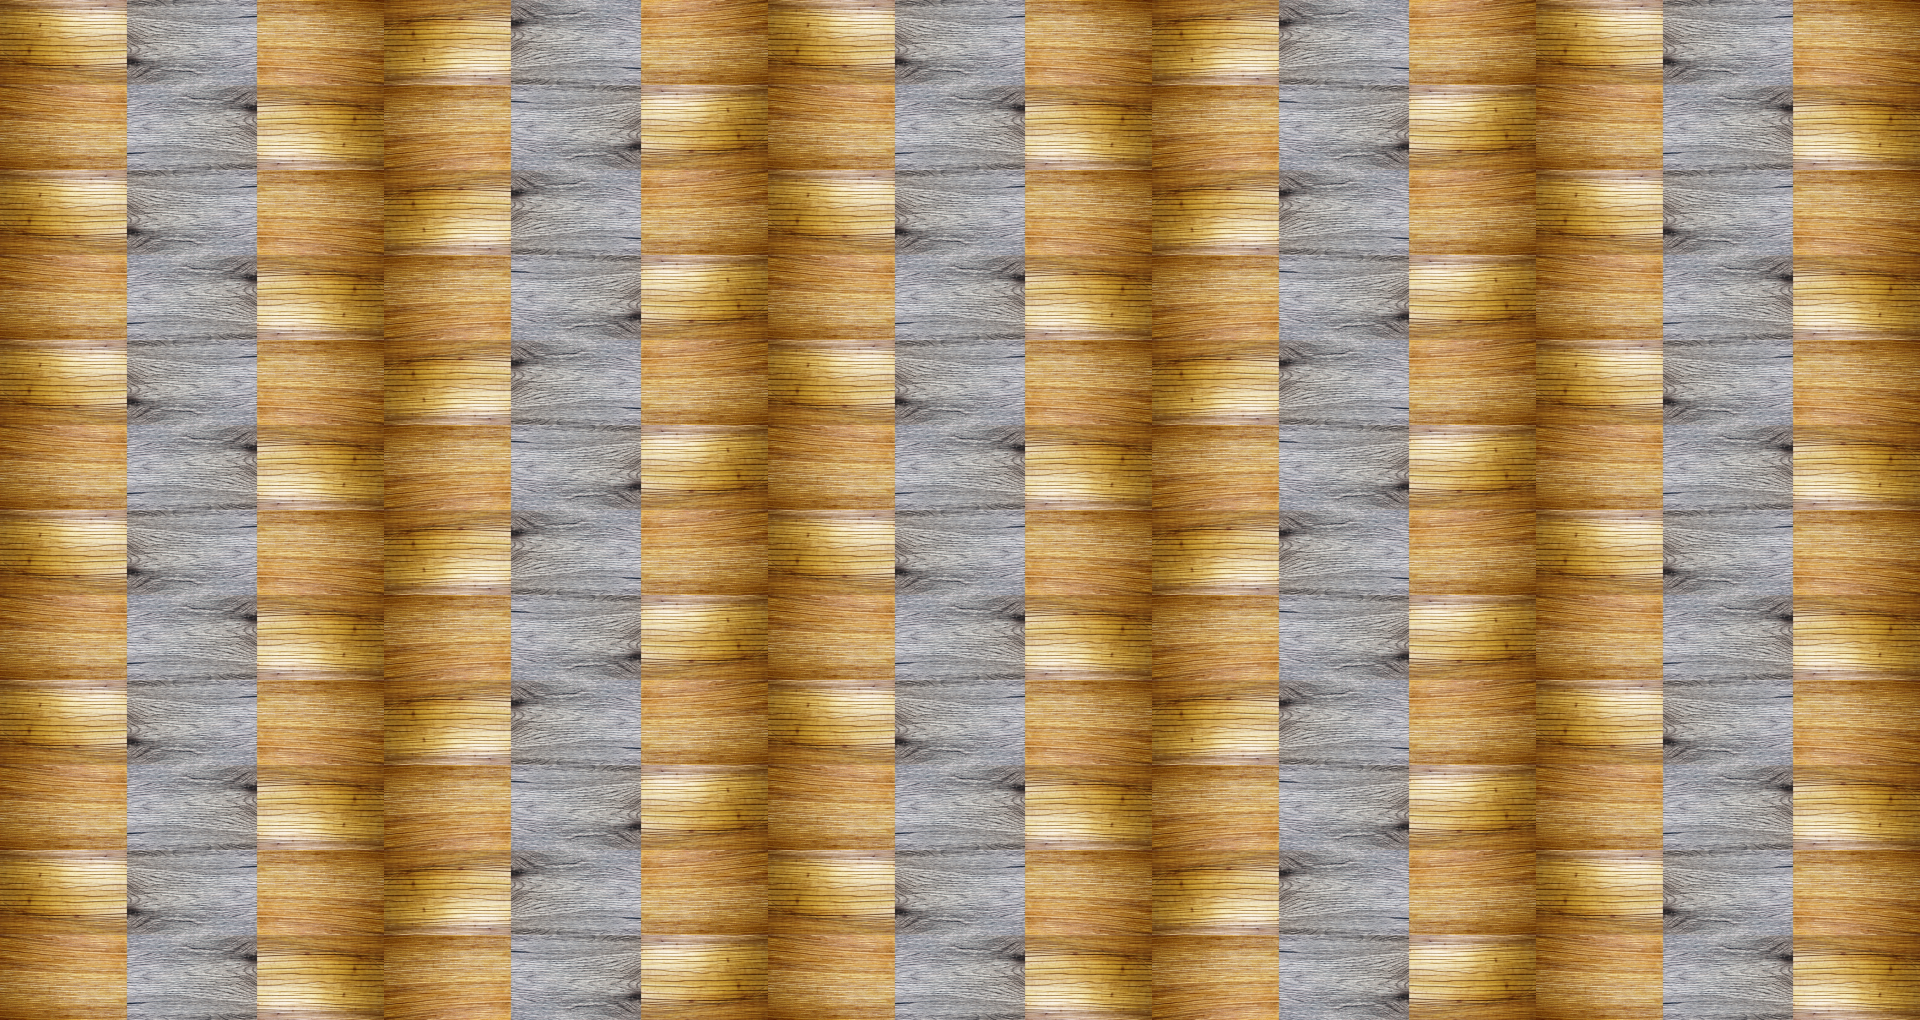 Wood Texture Pattern Tiles Background